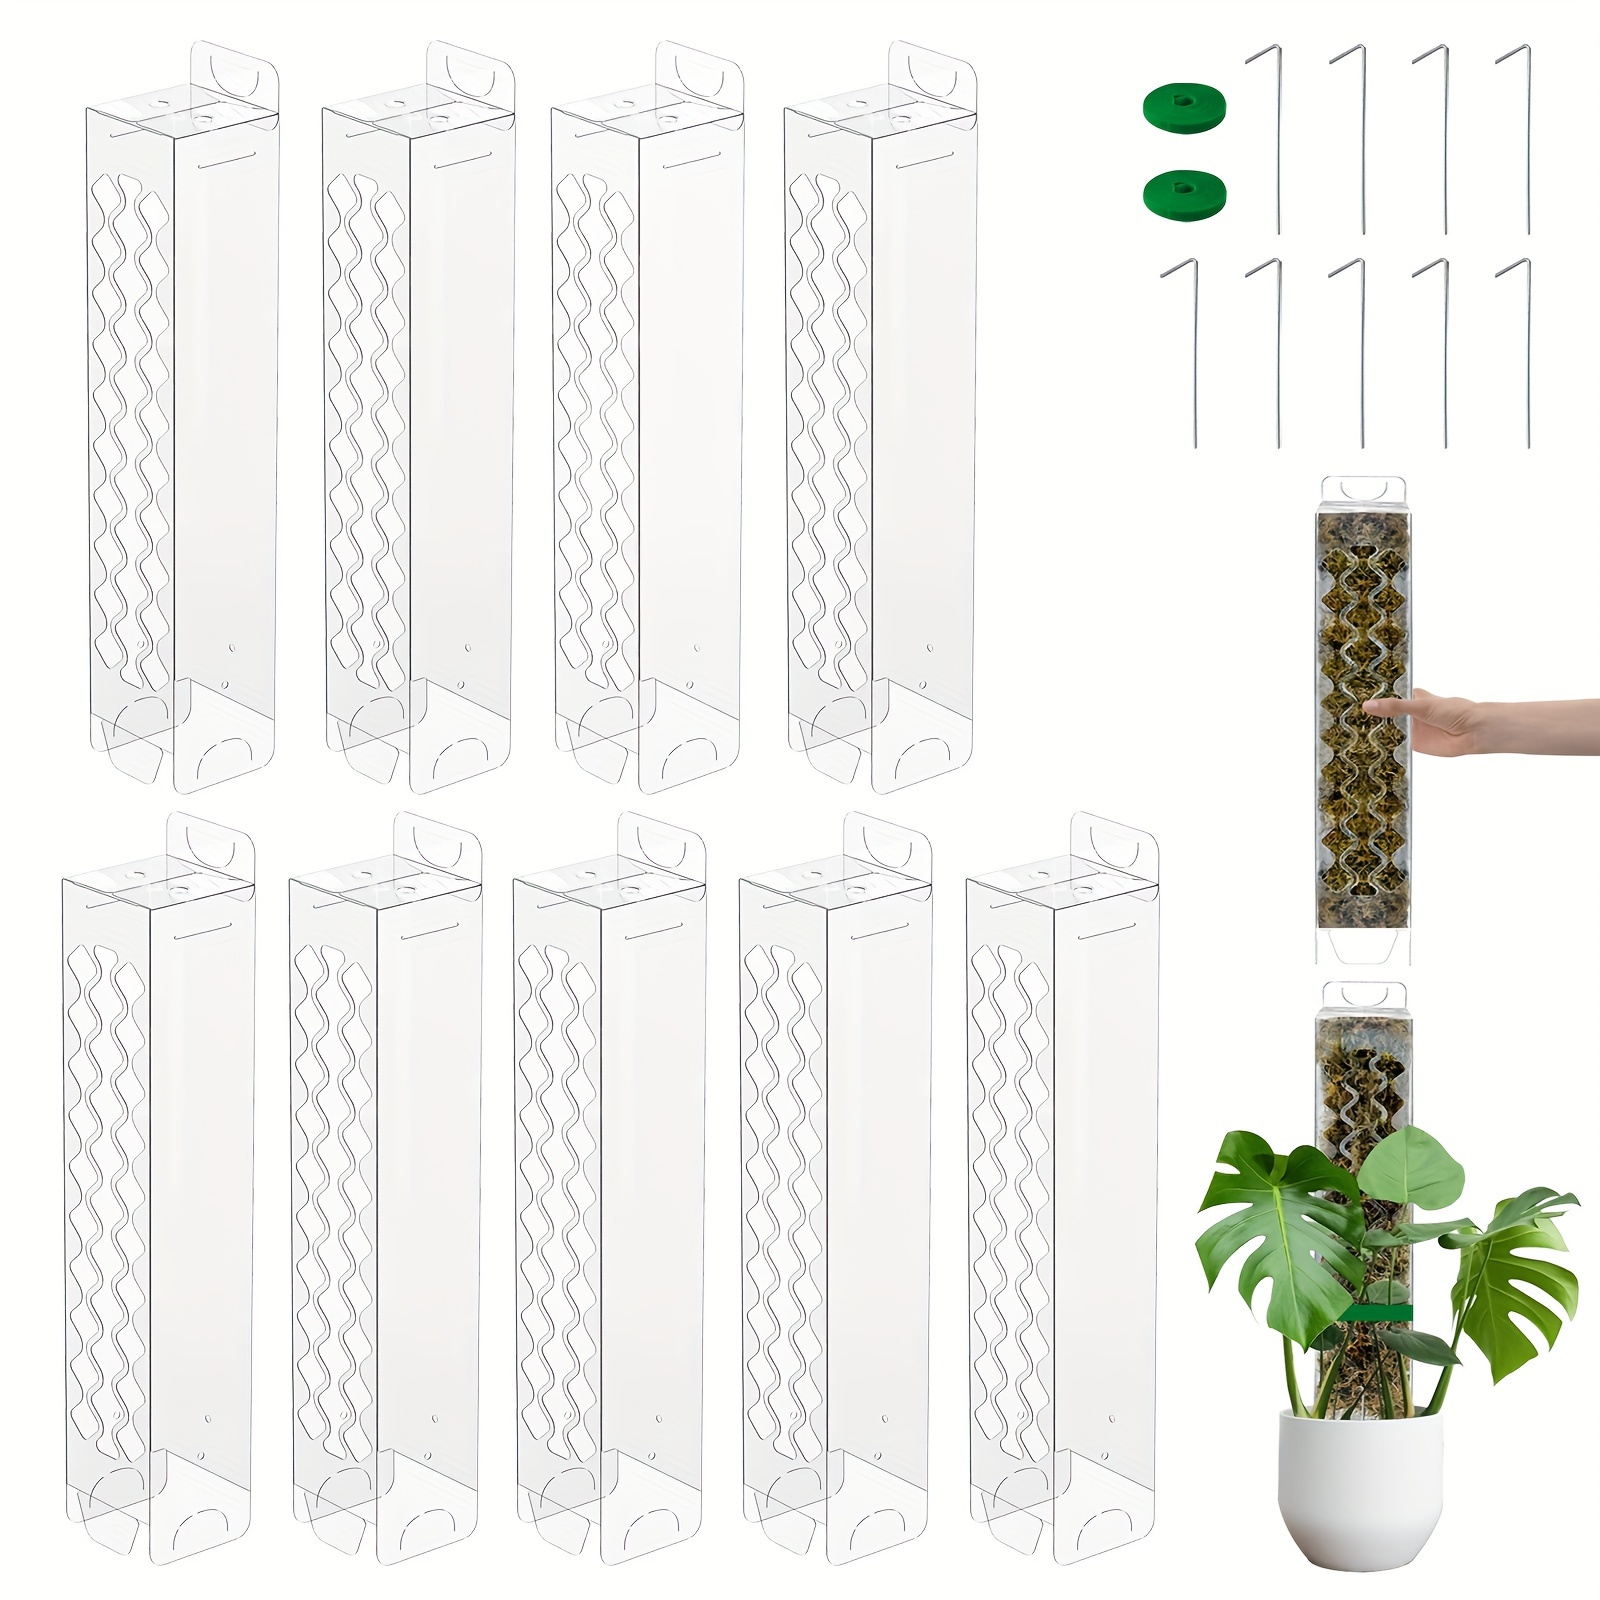 

9 Pack 14inch/35.56cm Moss Pole Plastic Moss Box Upgrade Moss Pole For Plants Monstera, Stackable Plant Support, Self-watering Moss Sticks For Indoor Climbing Plants Work